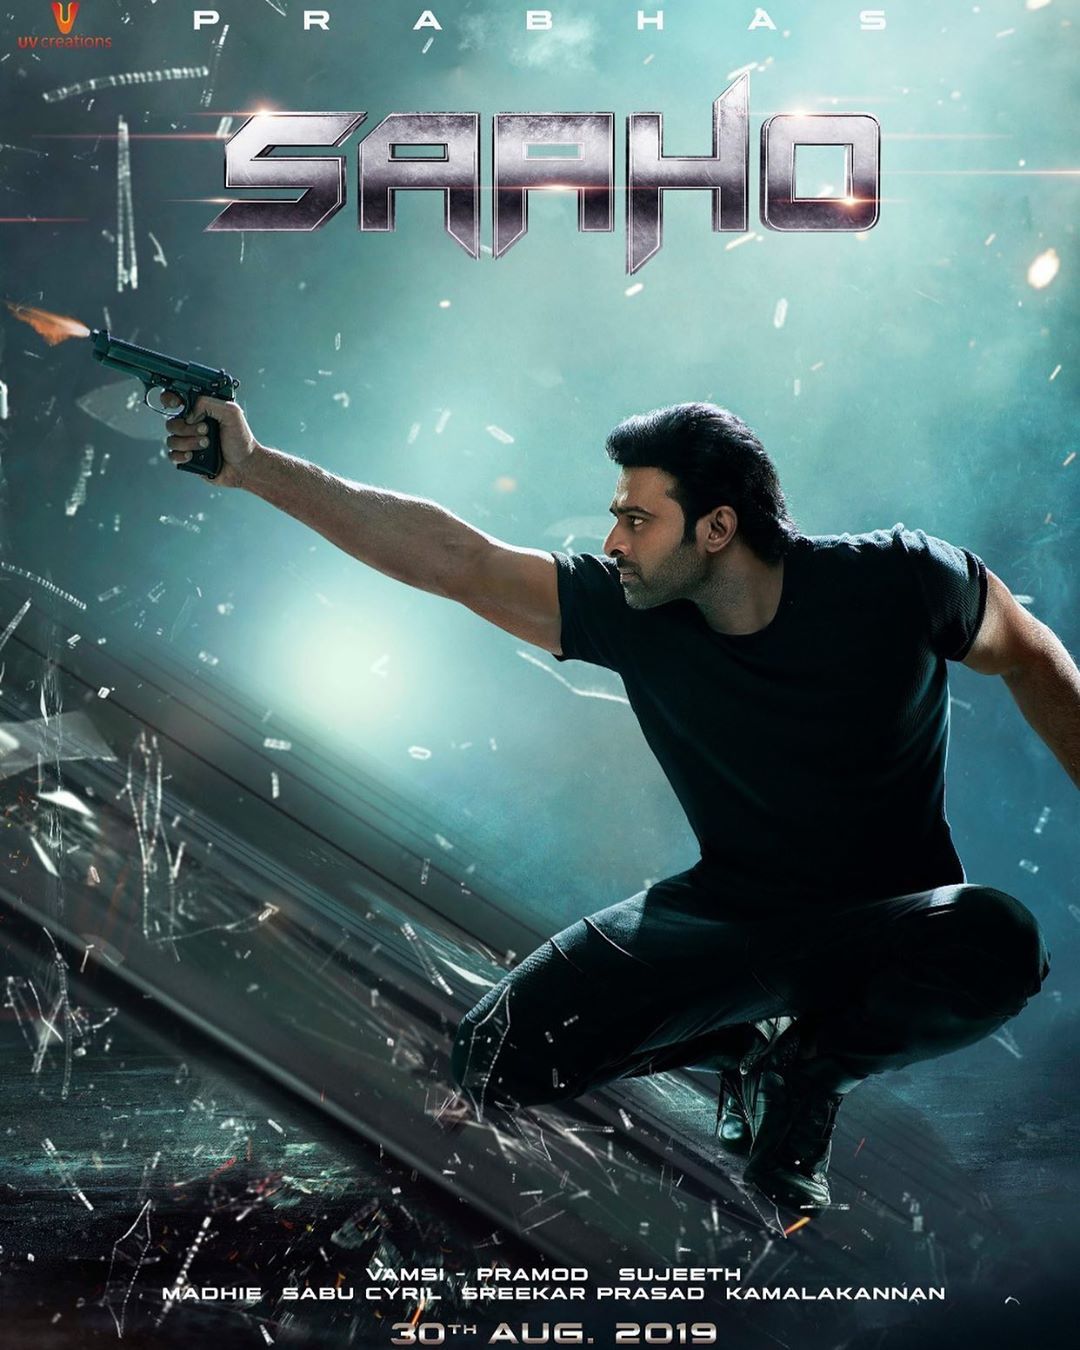 Prabhas-Shraddha Kapoor's Saaho [Hindi] Is Next Only To Salman Khan's Bharat After Opening Weekend